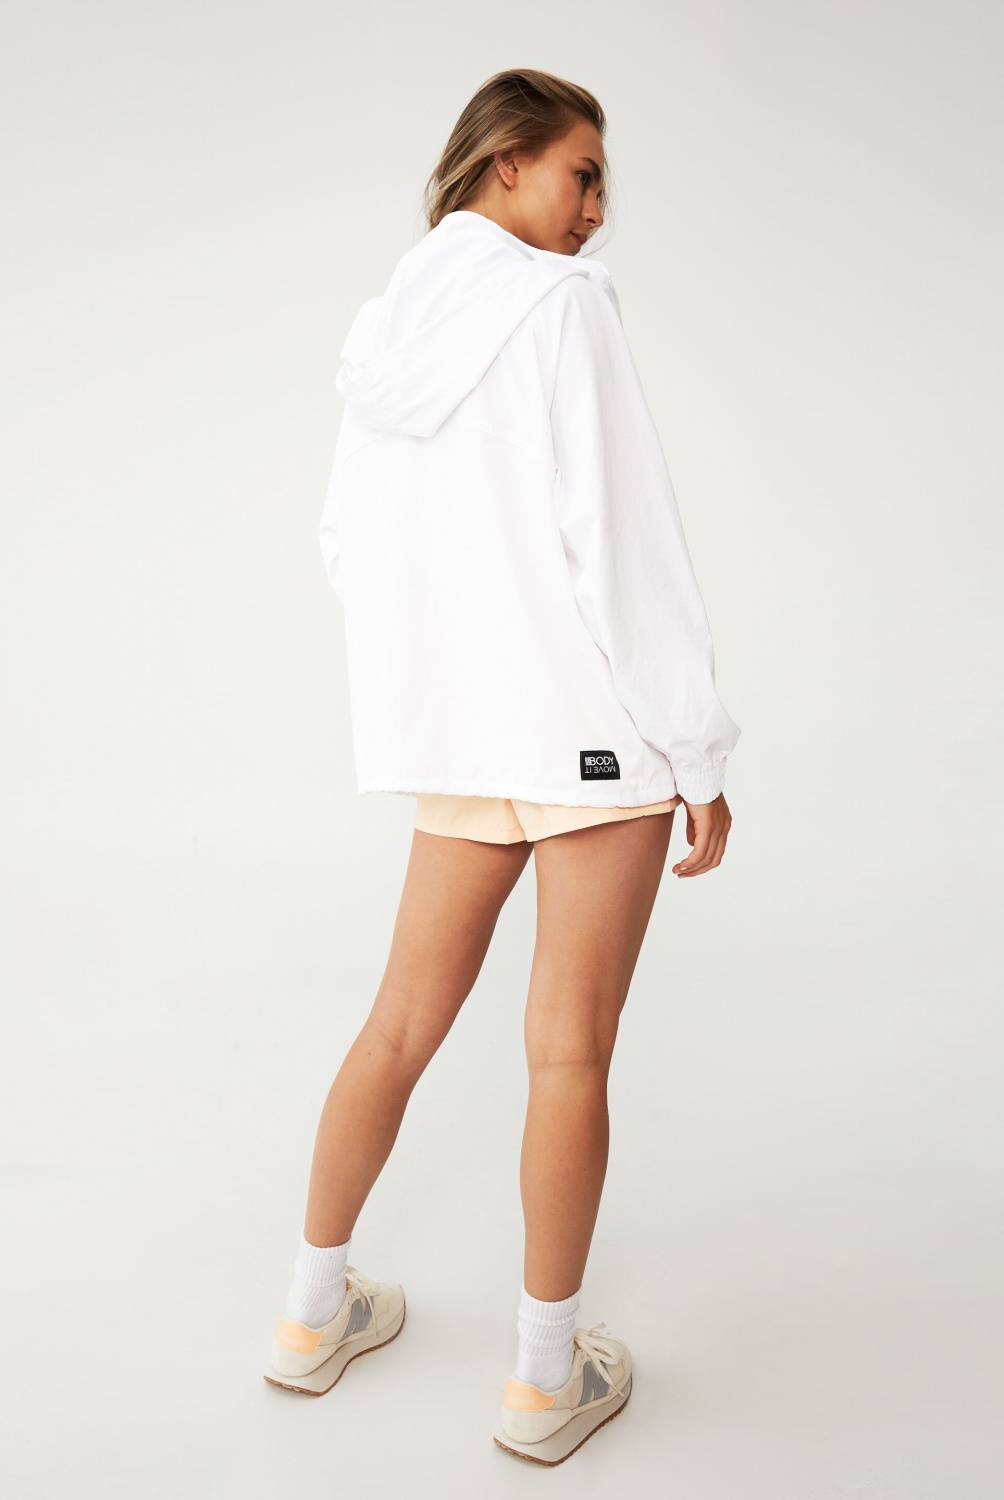 COTTON ON - Cotton On Chaqueta Deportiva-The Anorak Mujer